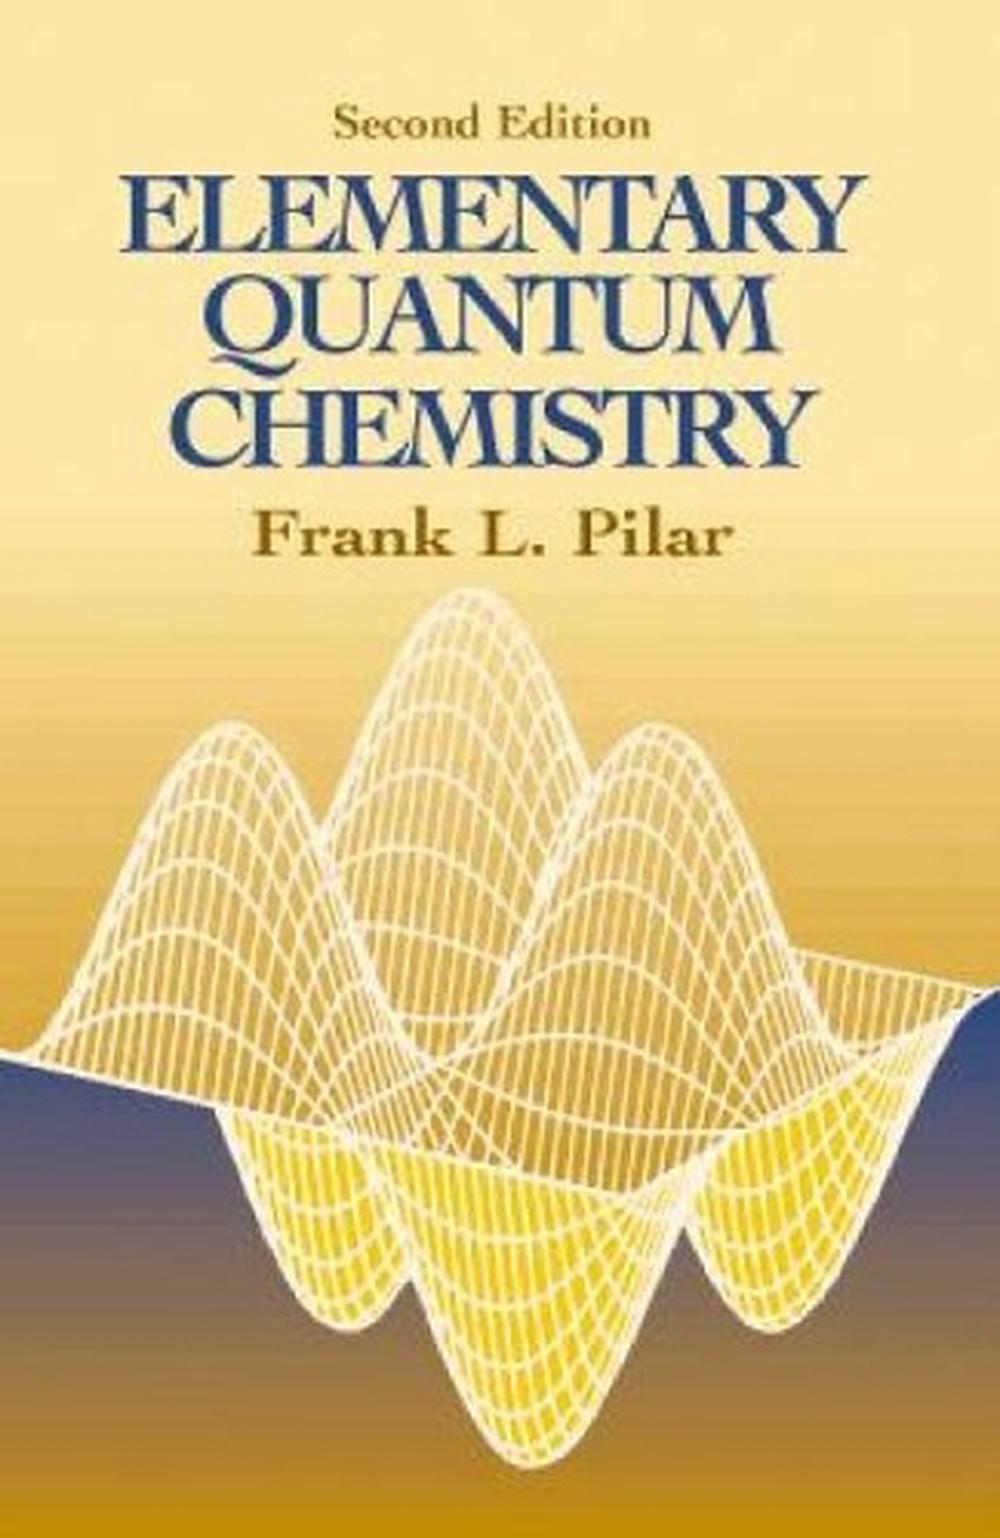 quantum chemistry research papers